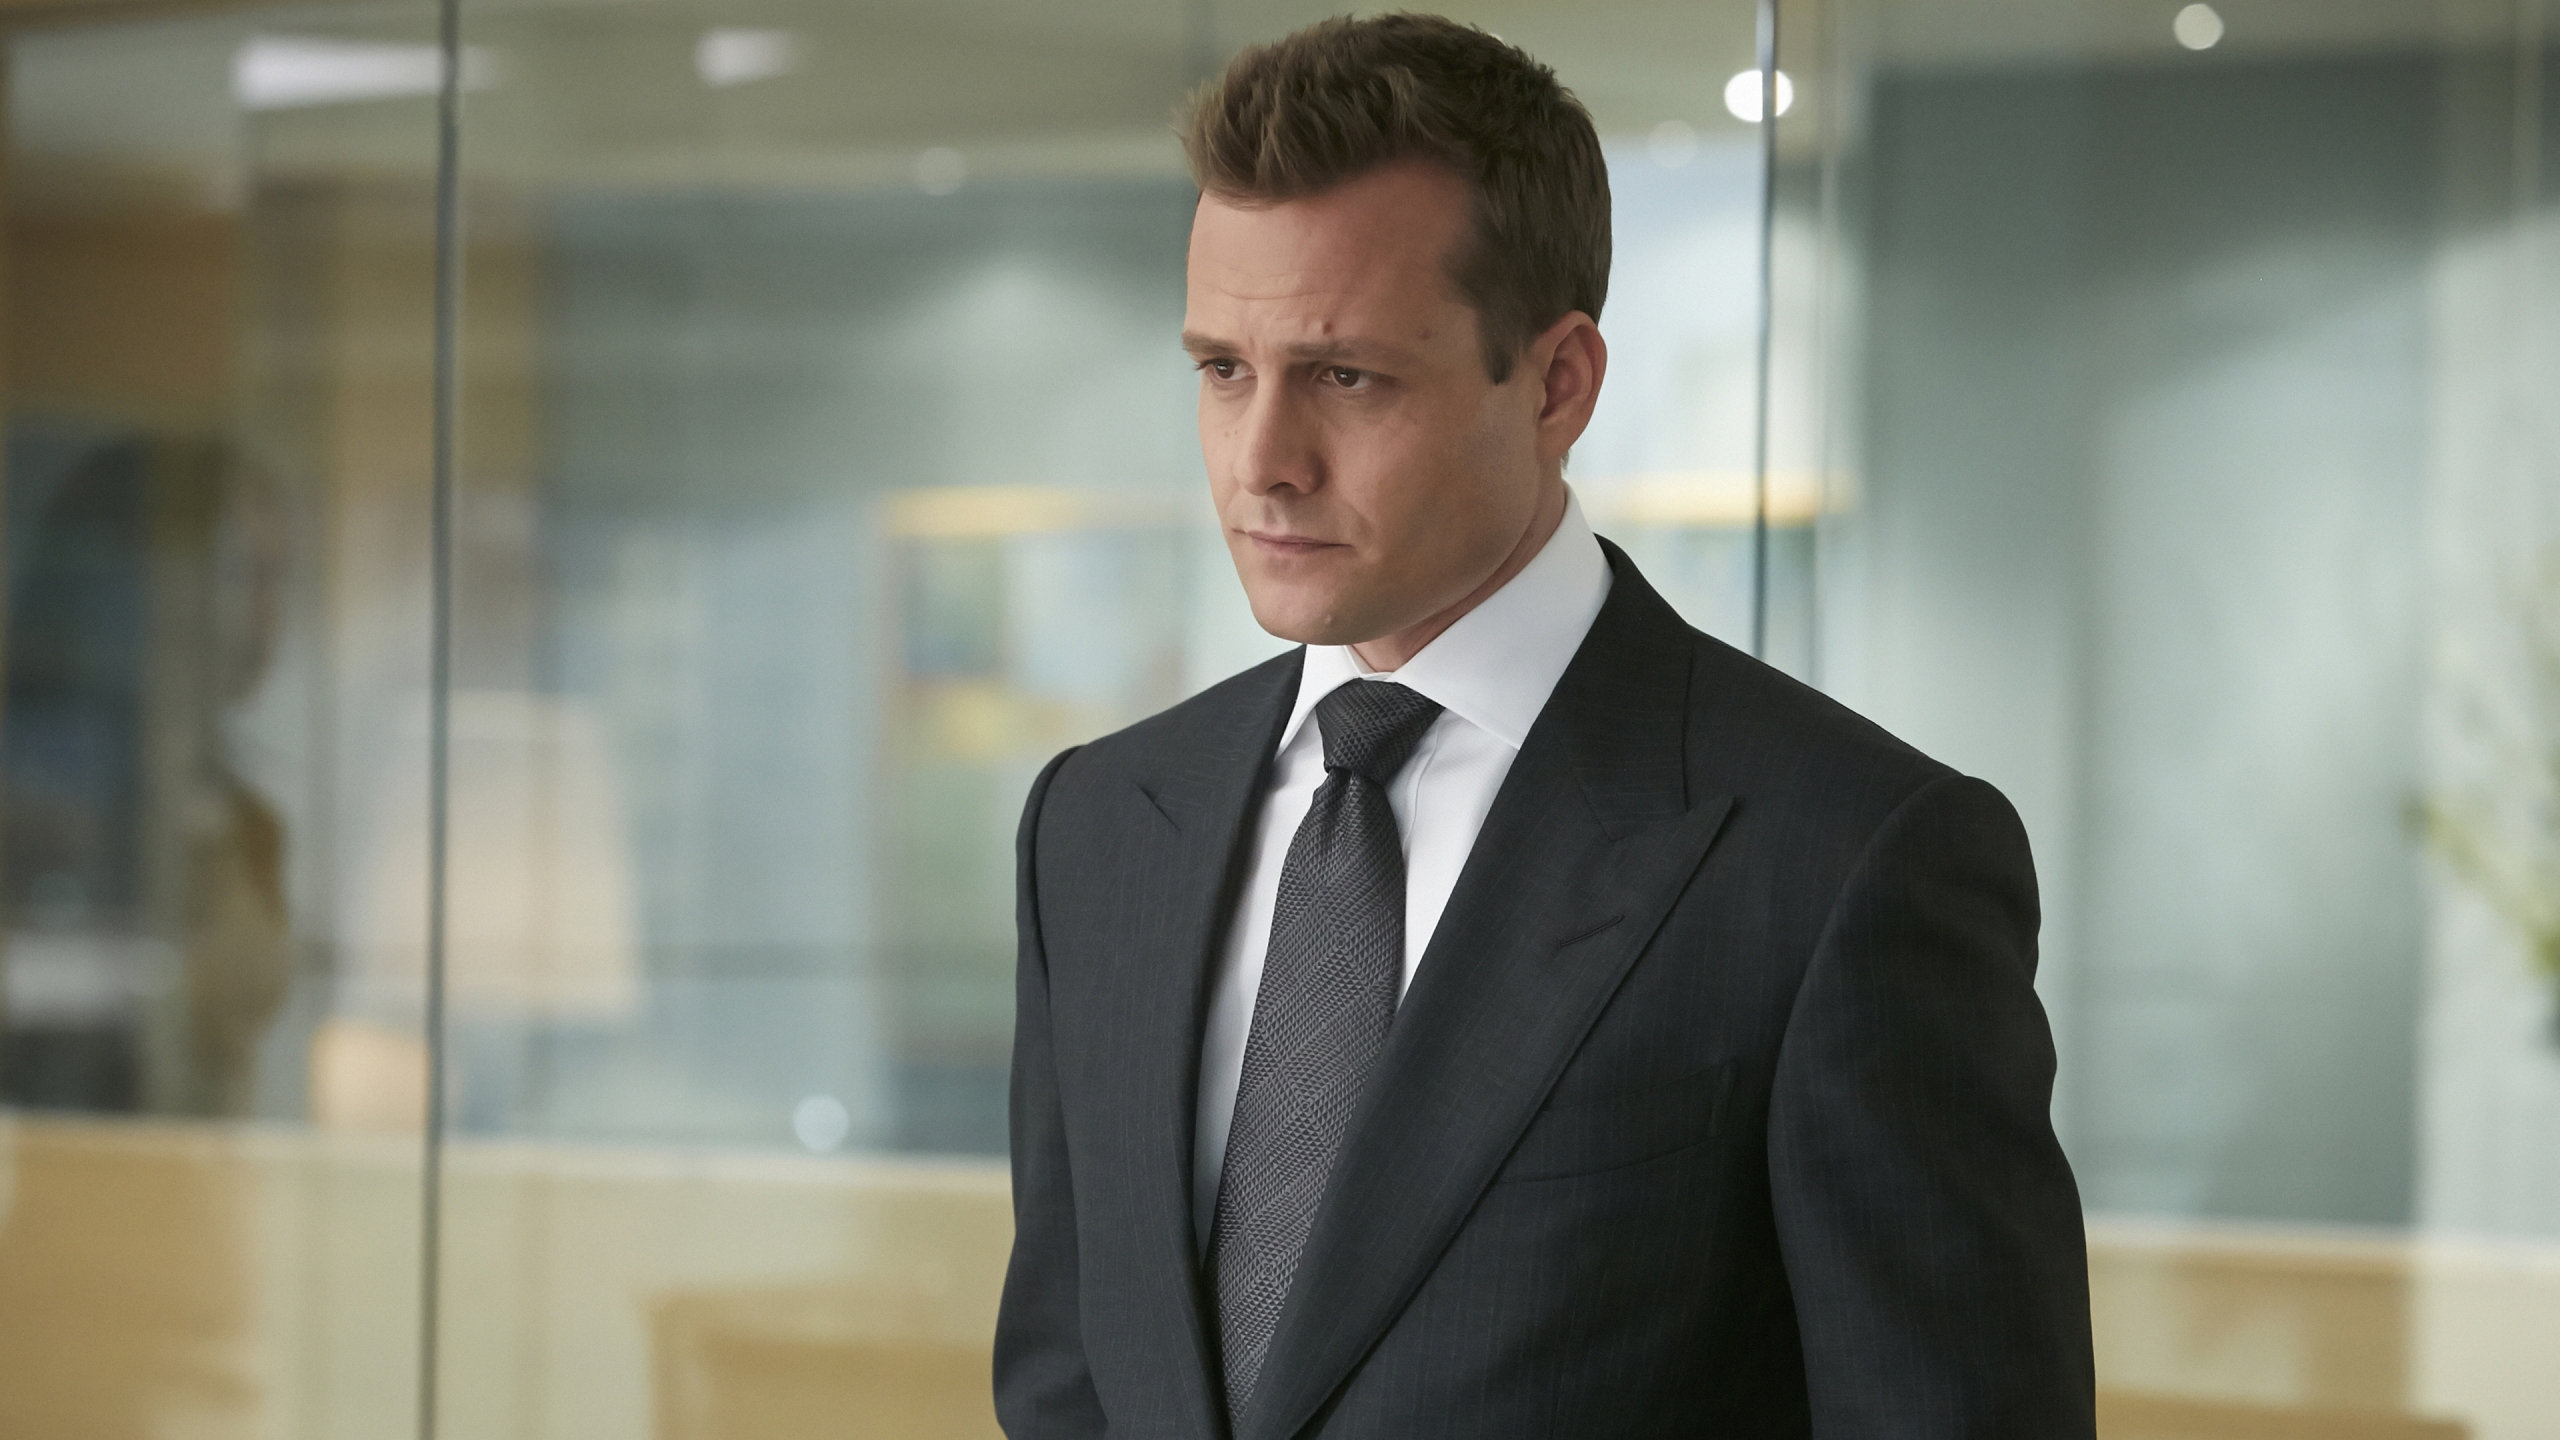 Harvey Specter Suits for 2560x1440 HDTV resolution